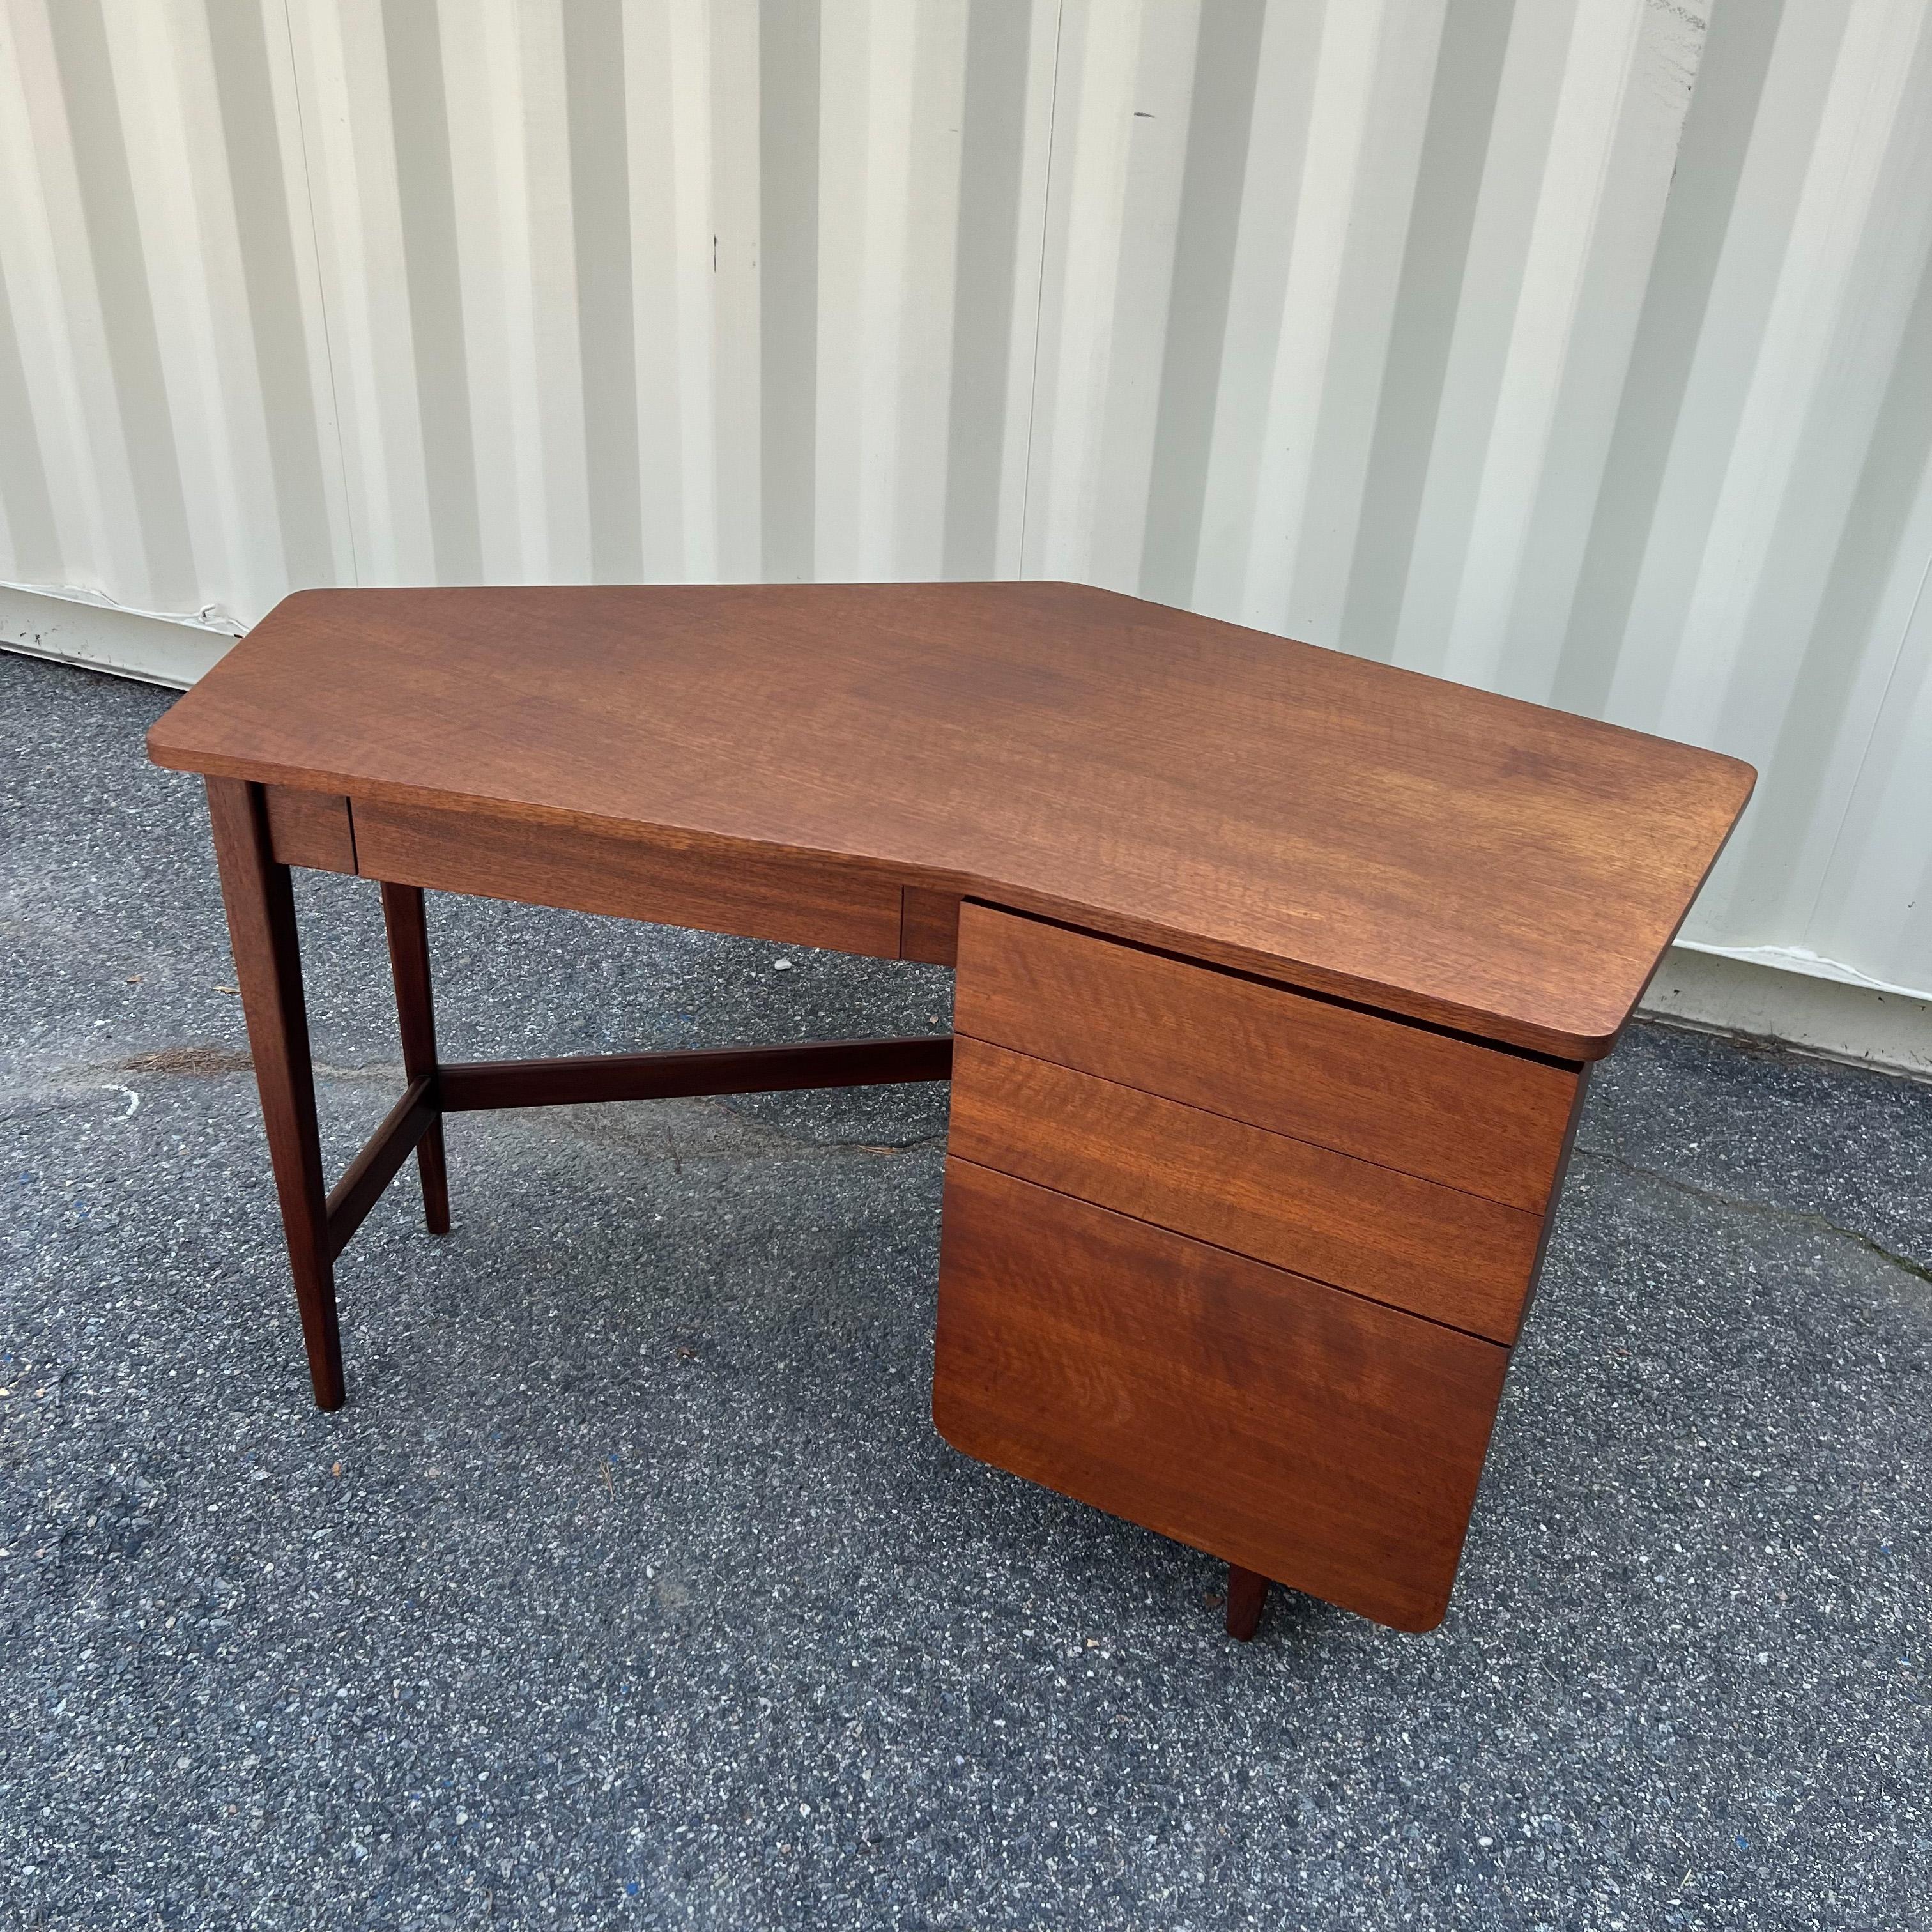 A rare angled desk designed by Bertha Schaefer in collaboration with Gio Ponti for Singer and Sons.